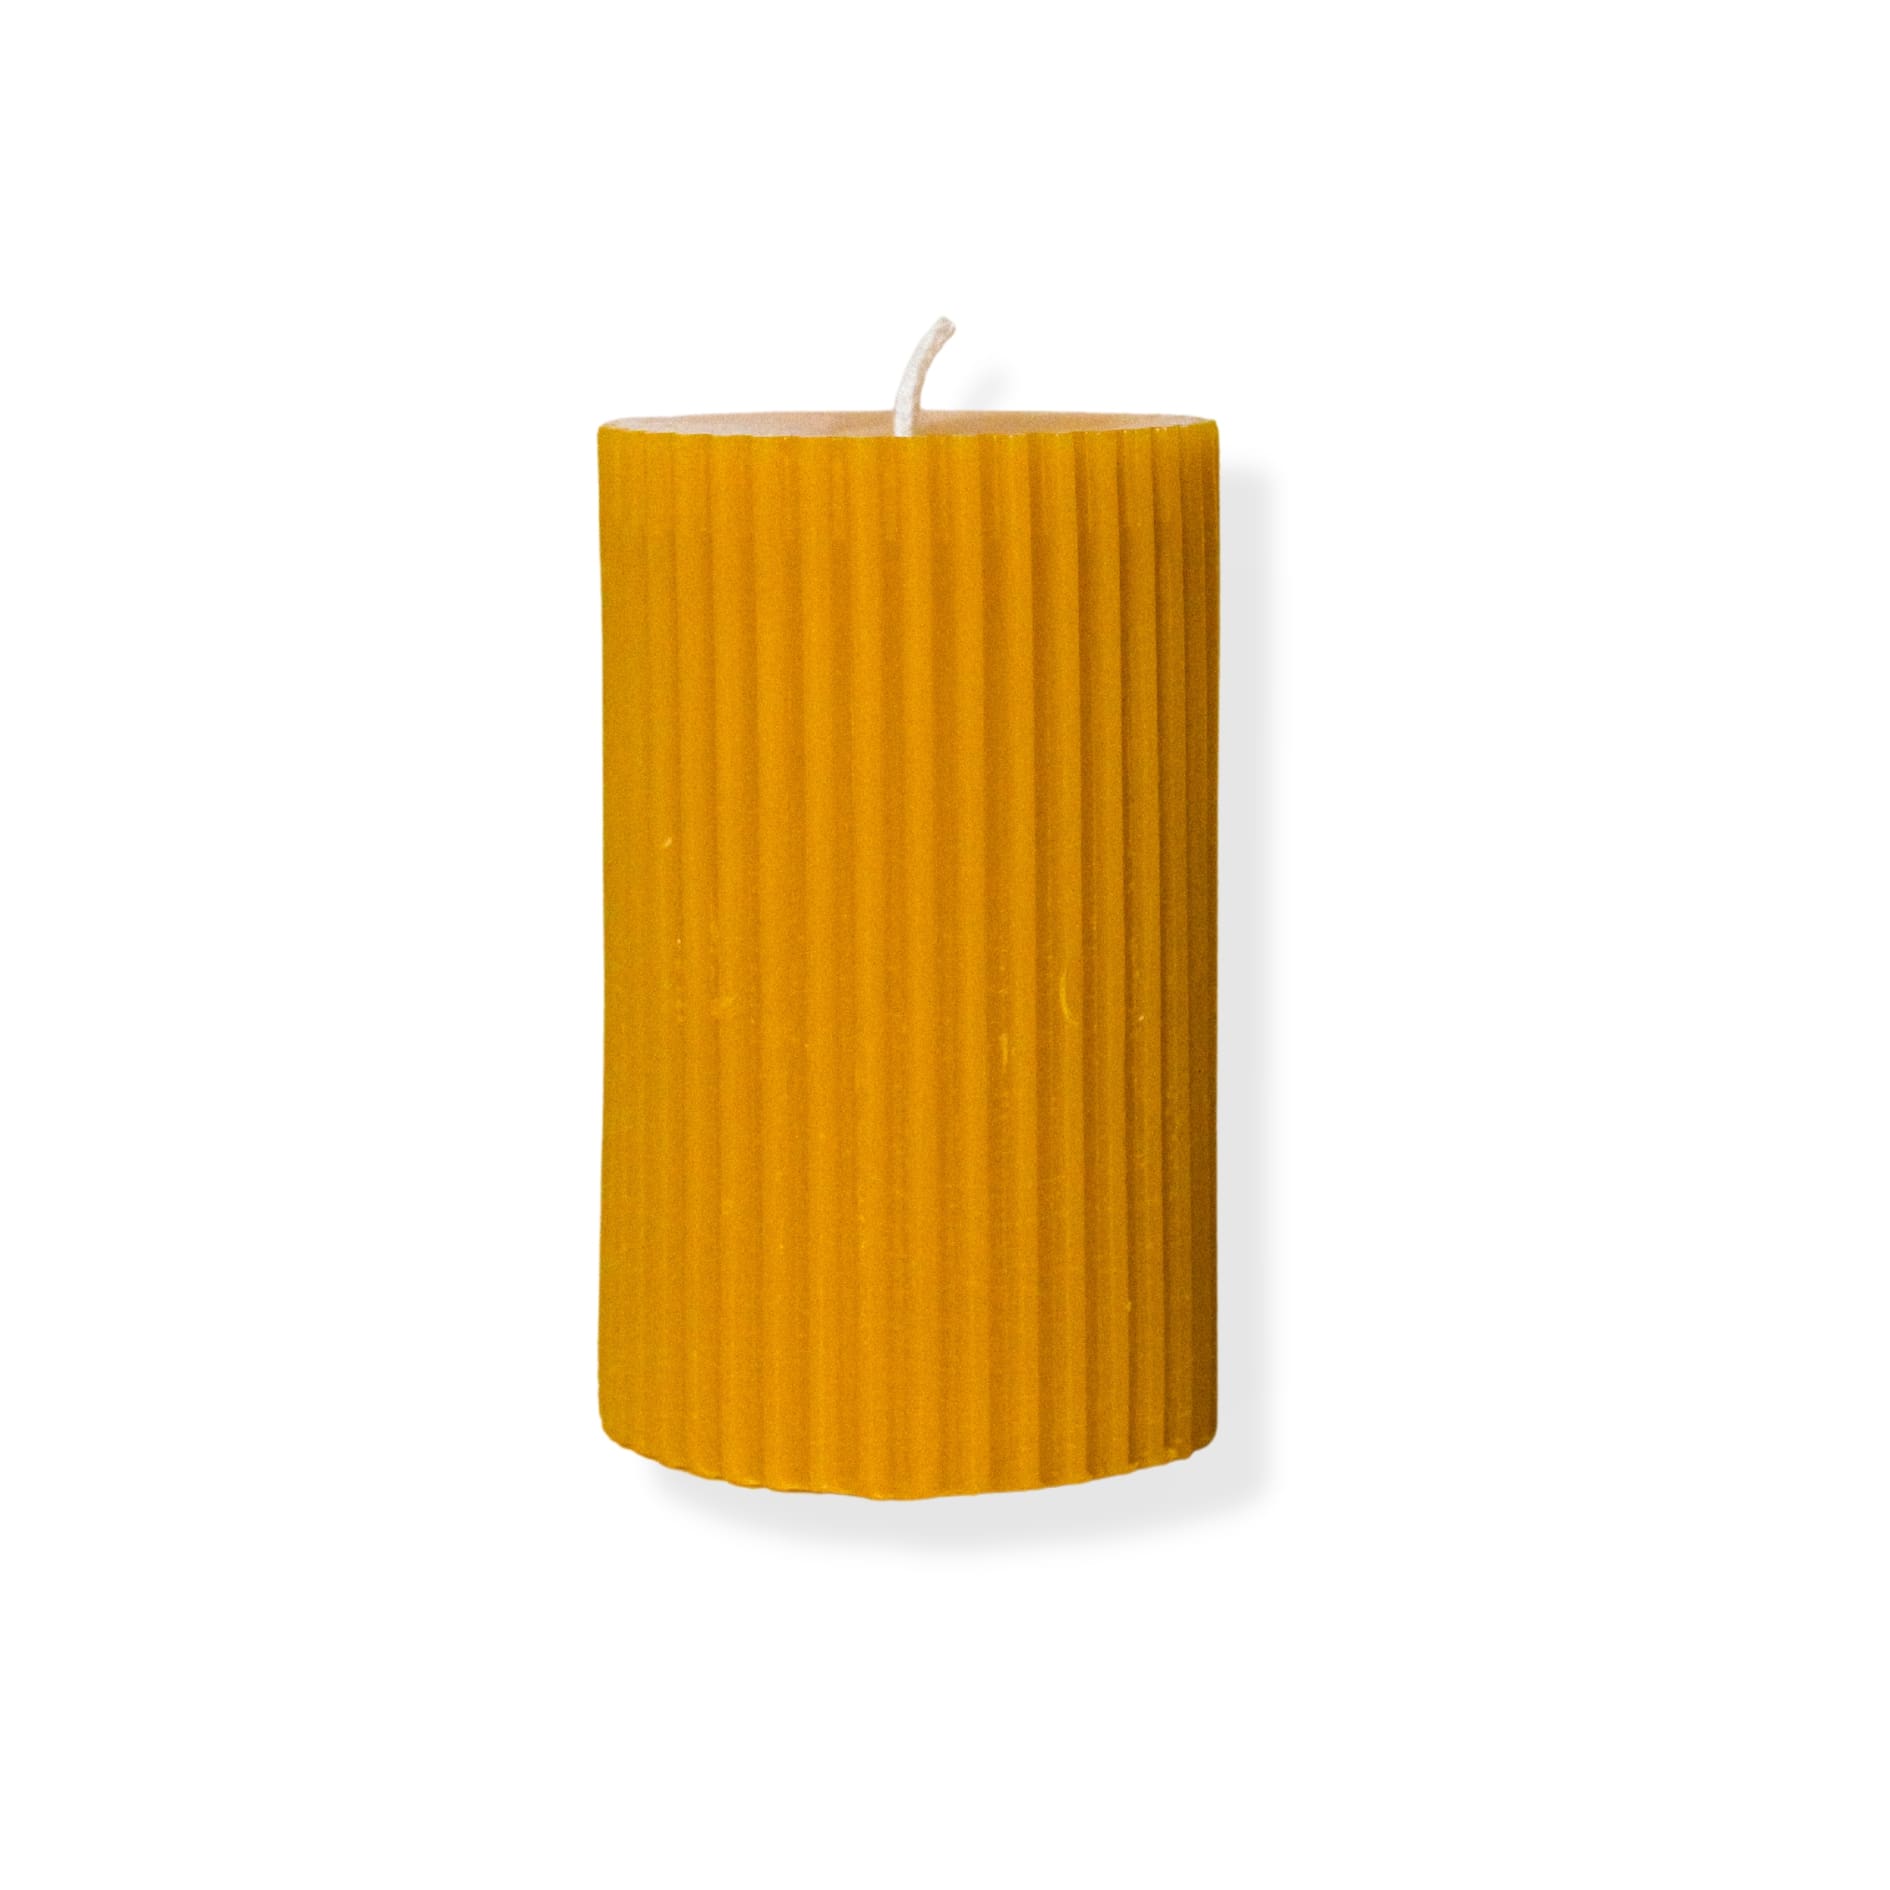 Ribbed Pillar Candle - The Plastic Free Co.